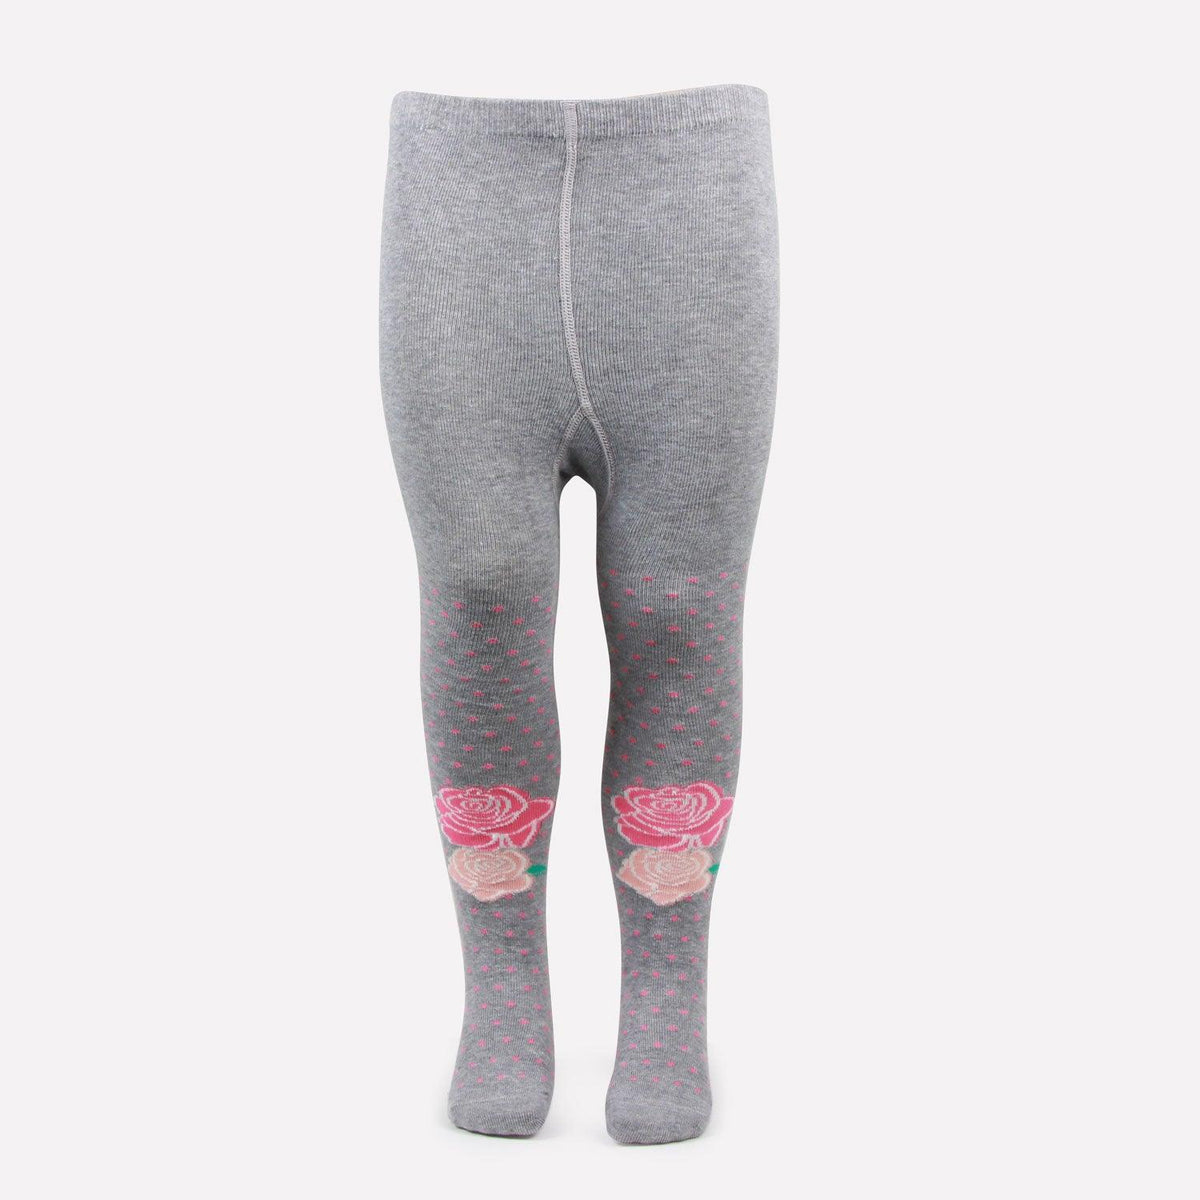 Barbie Printed Knitted Tights For Baby Girls - Light Grey